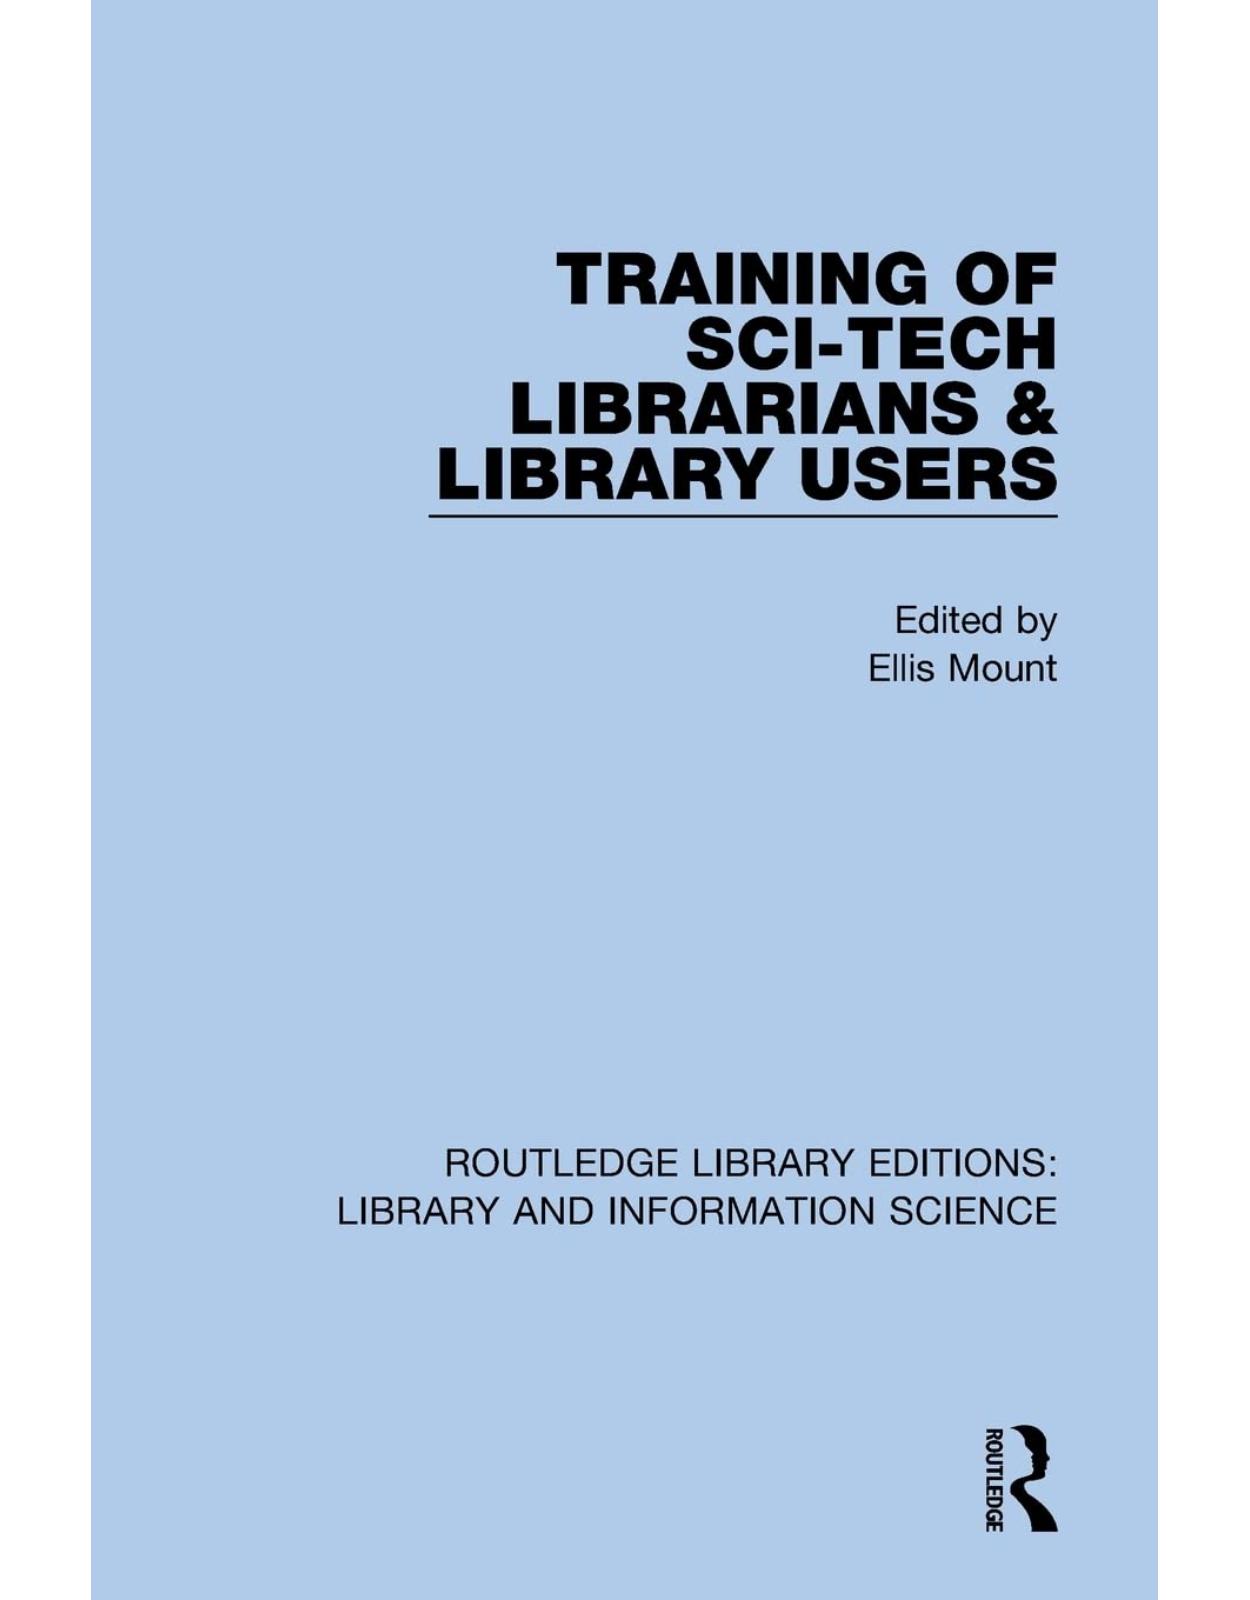 Training of Sci-Tech Librarians & Library Users